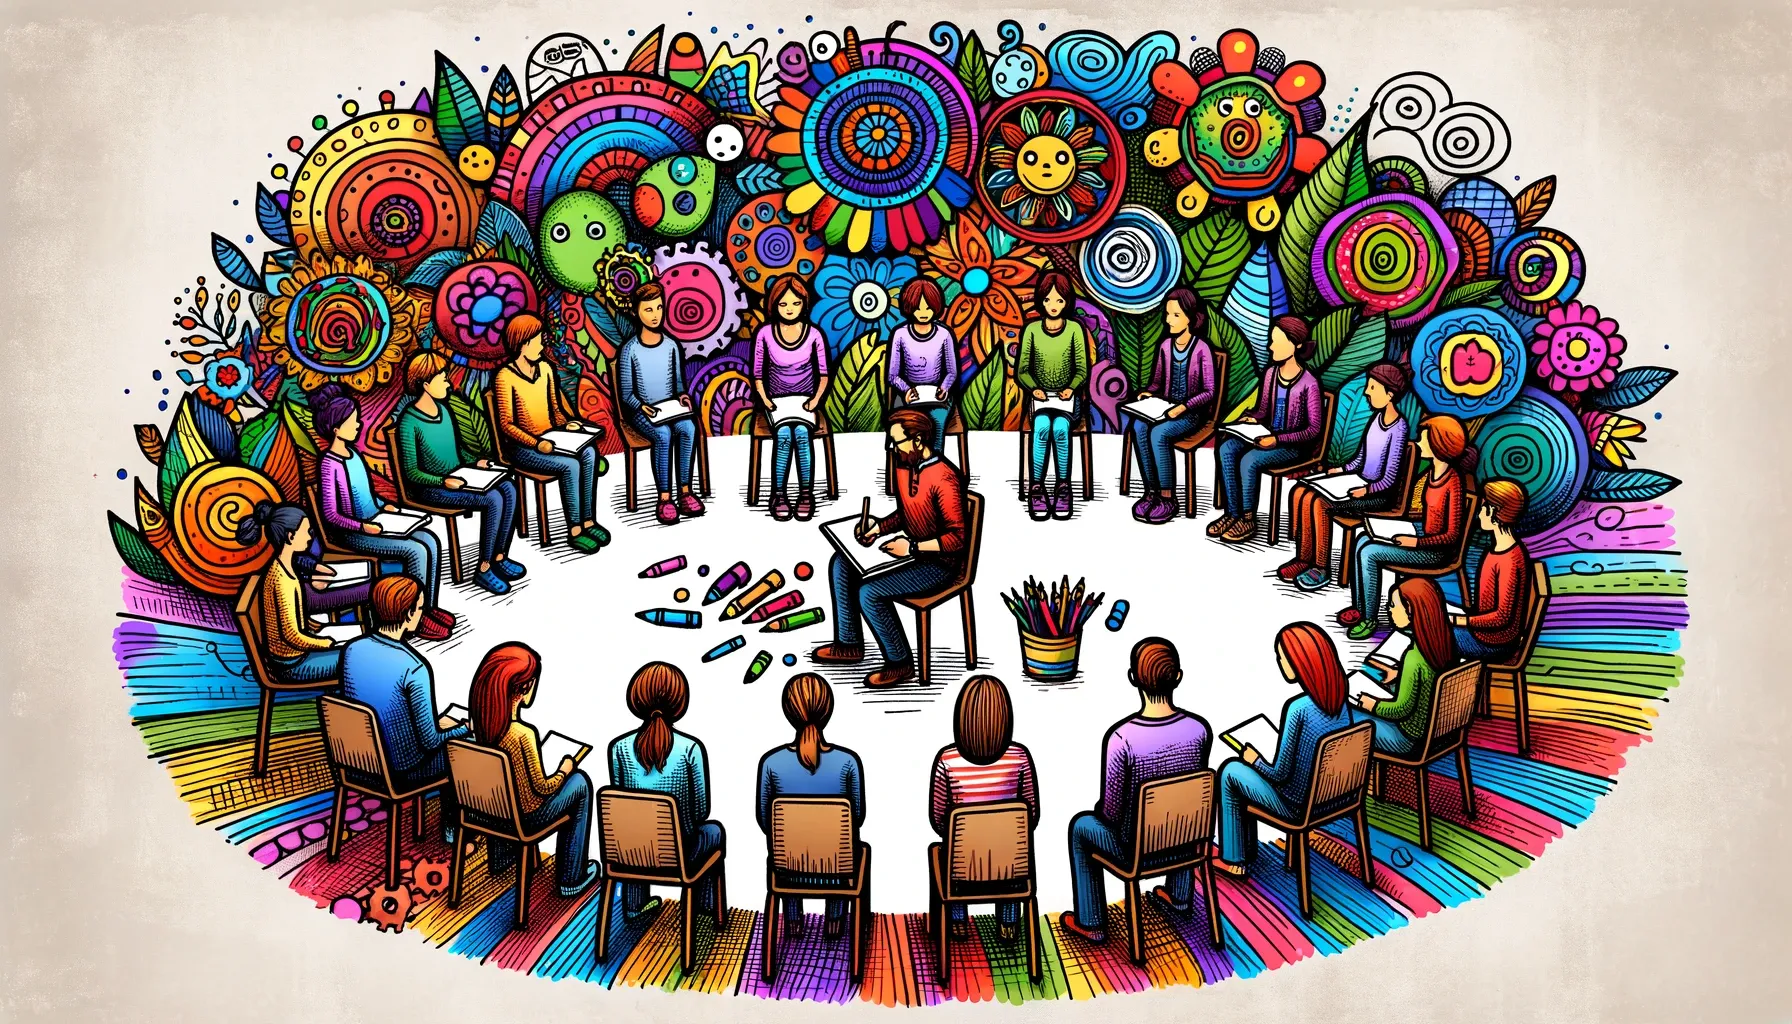 Wide doodle of various adults sitting in a circle, each with their own coloring book, while a therapist observes them. The scene is filled with vibrant colors and childlike drawings, capturing the idea of art therapy.